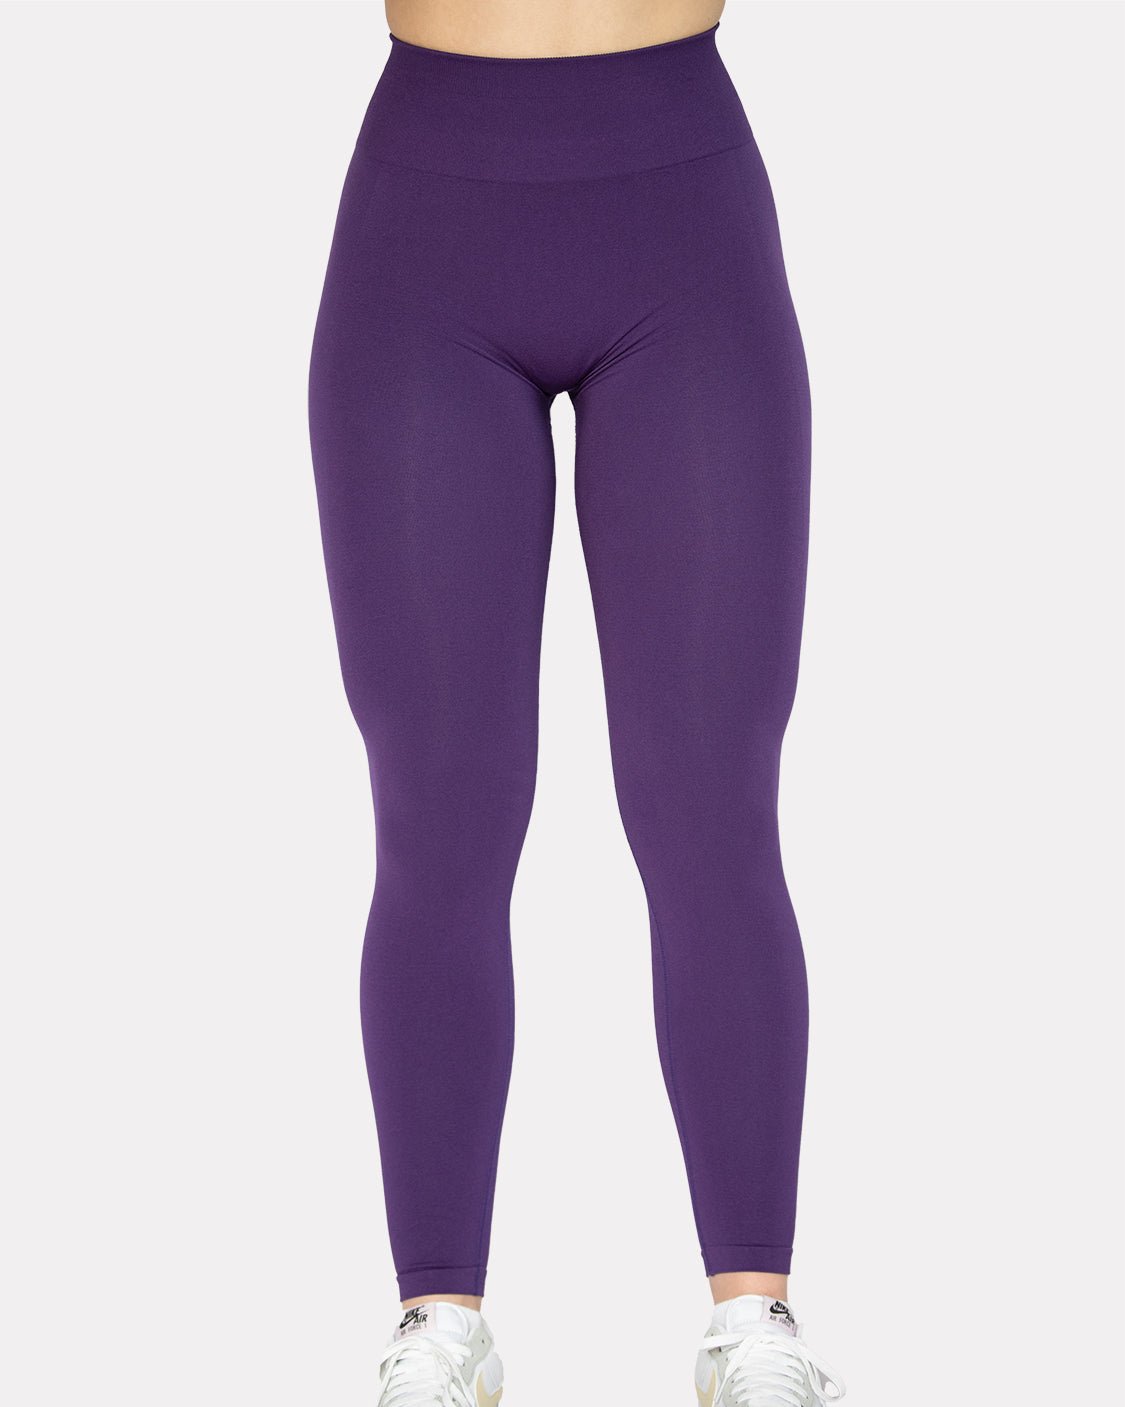 I have these Aurola leggings in every color bc they're literally the m